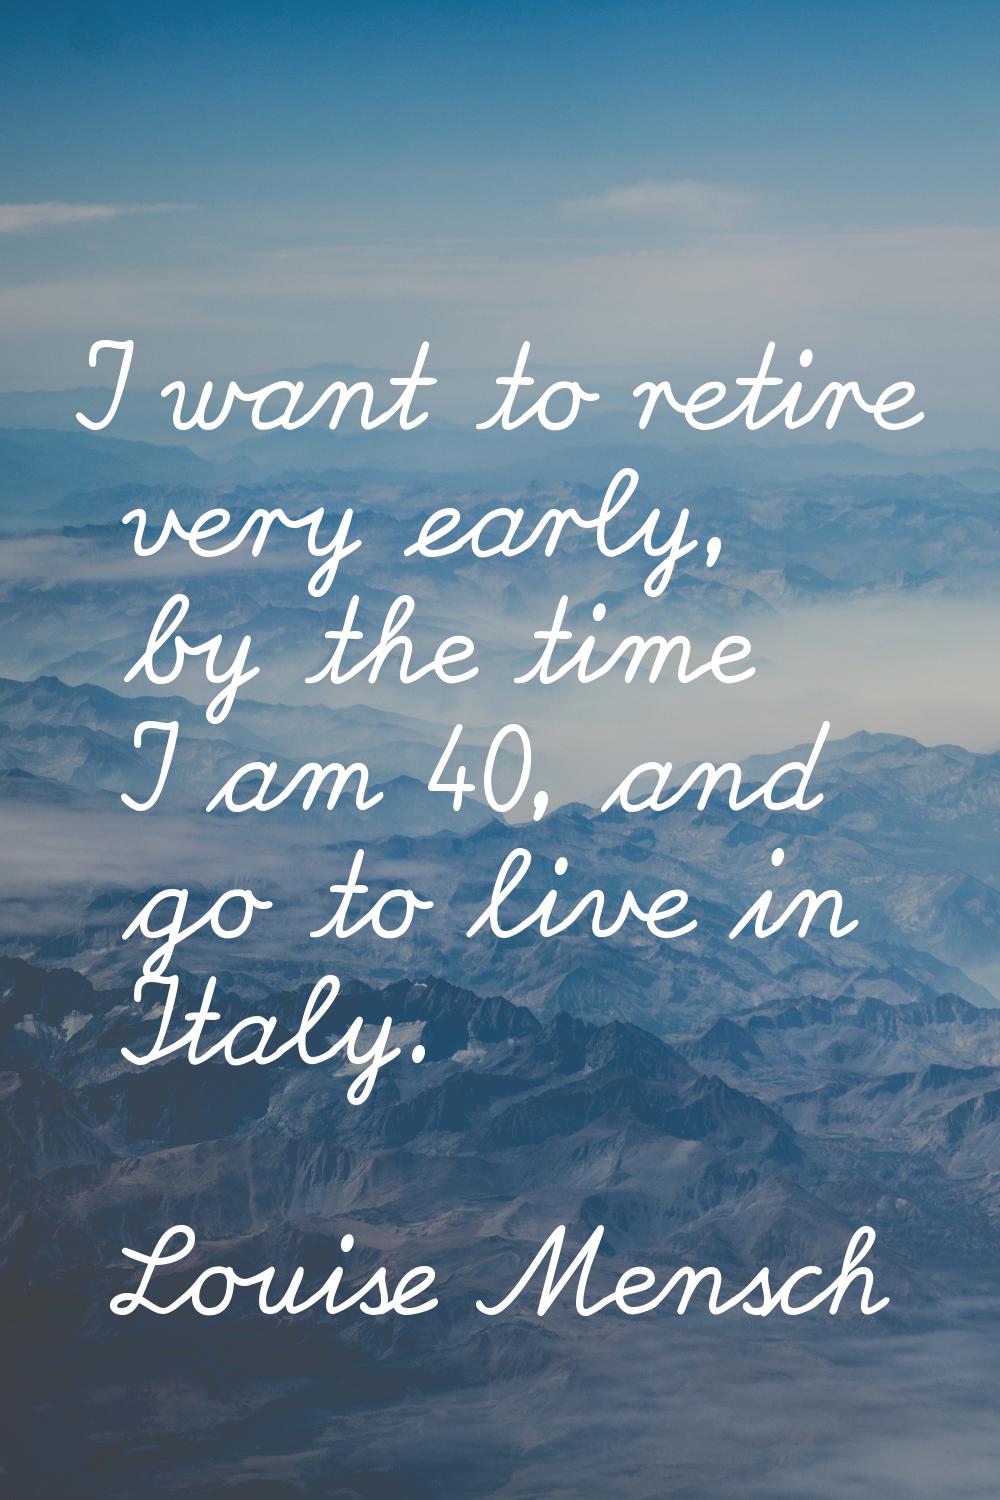 I want to retire very early, by the time I am 40, and go to live in Italy.